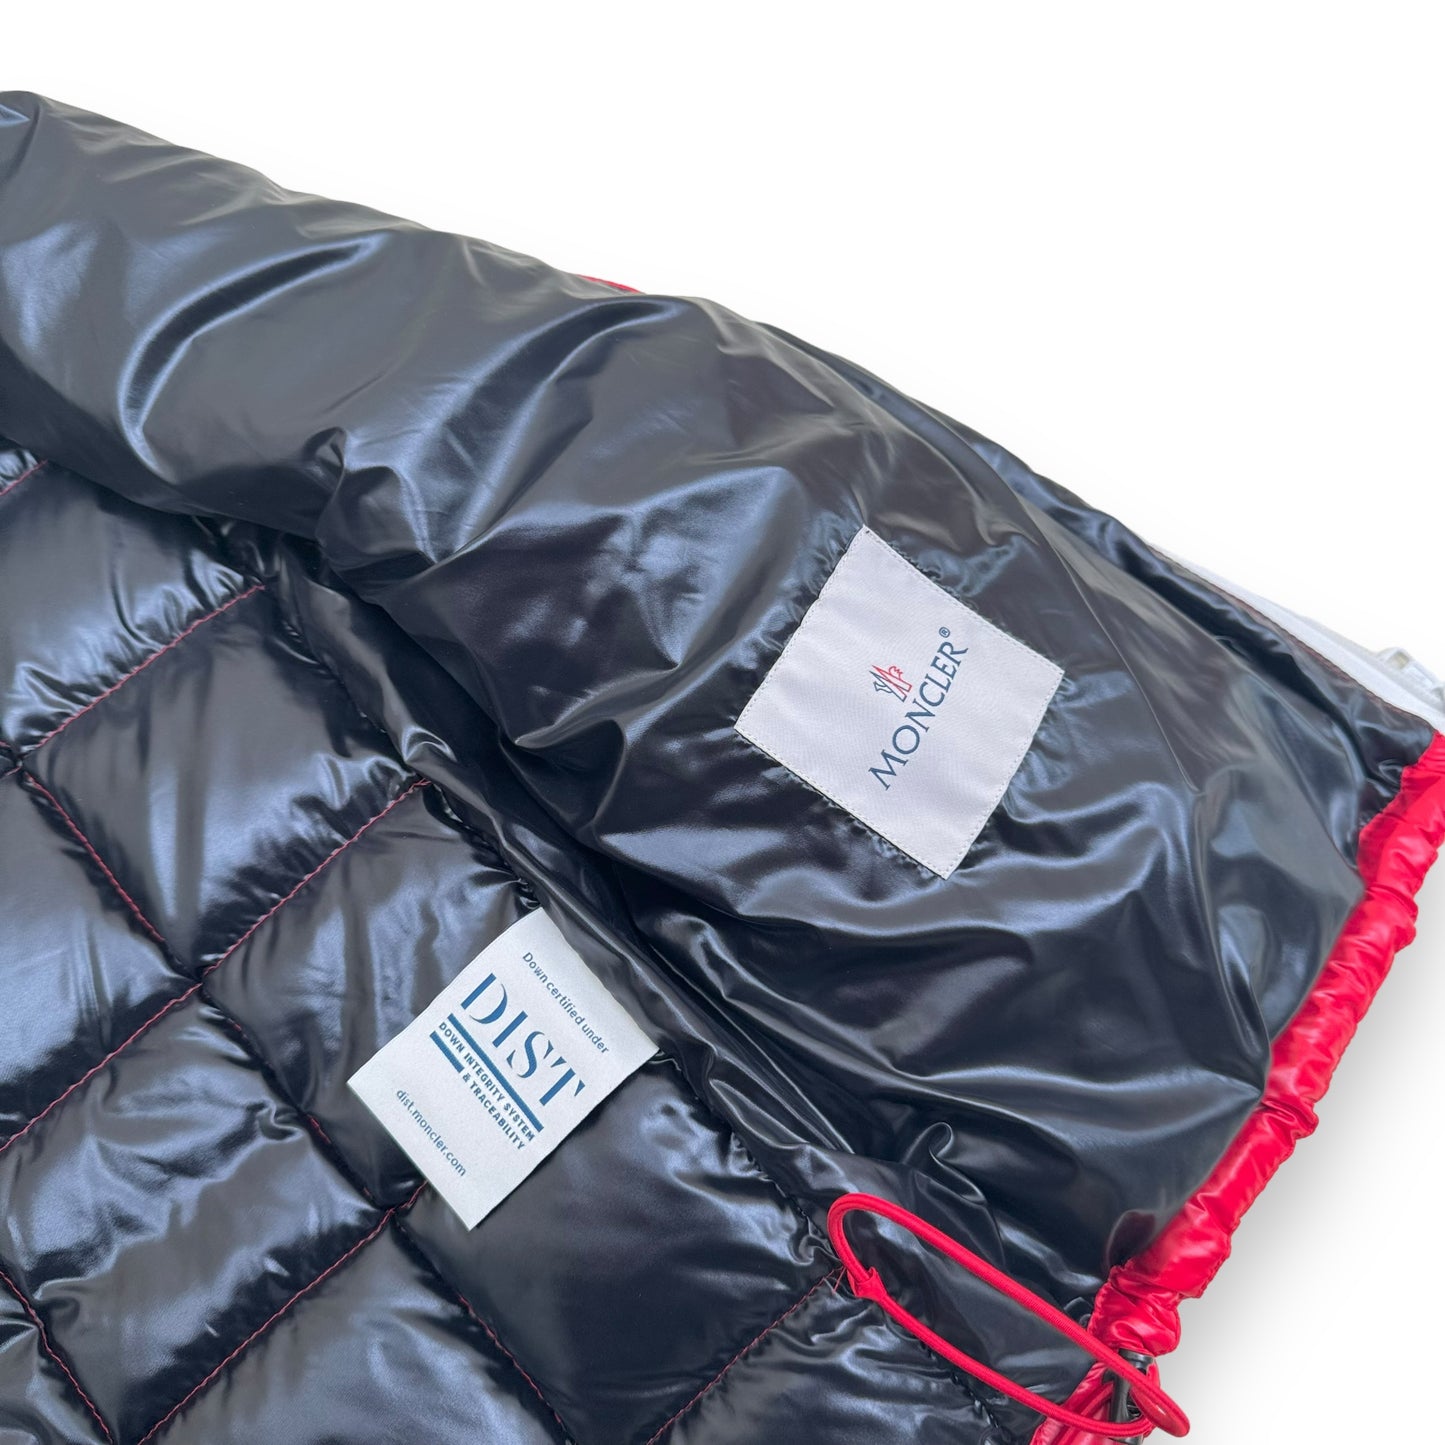 MONCLER DENAIN SQUARE-QUILTED PUFFER VEST RED / BLACK M